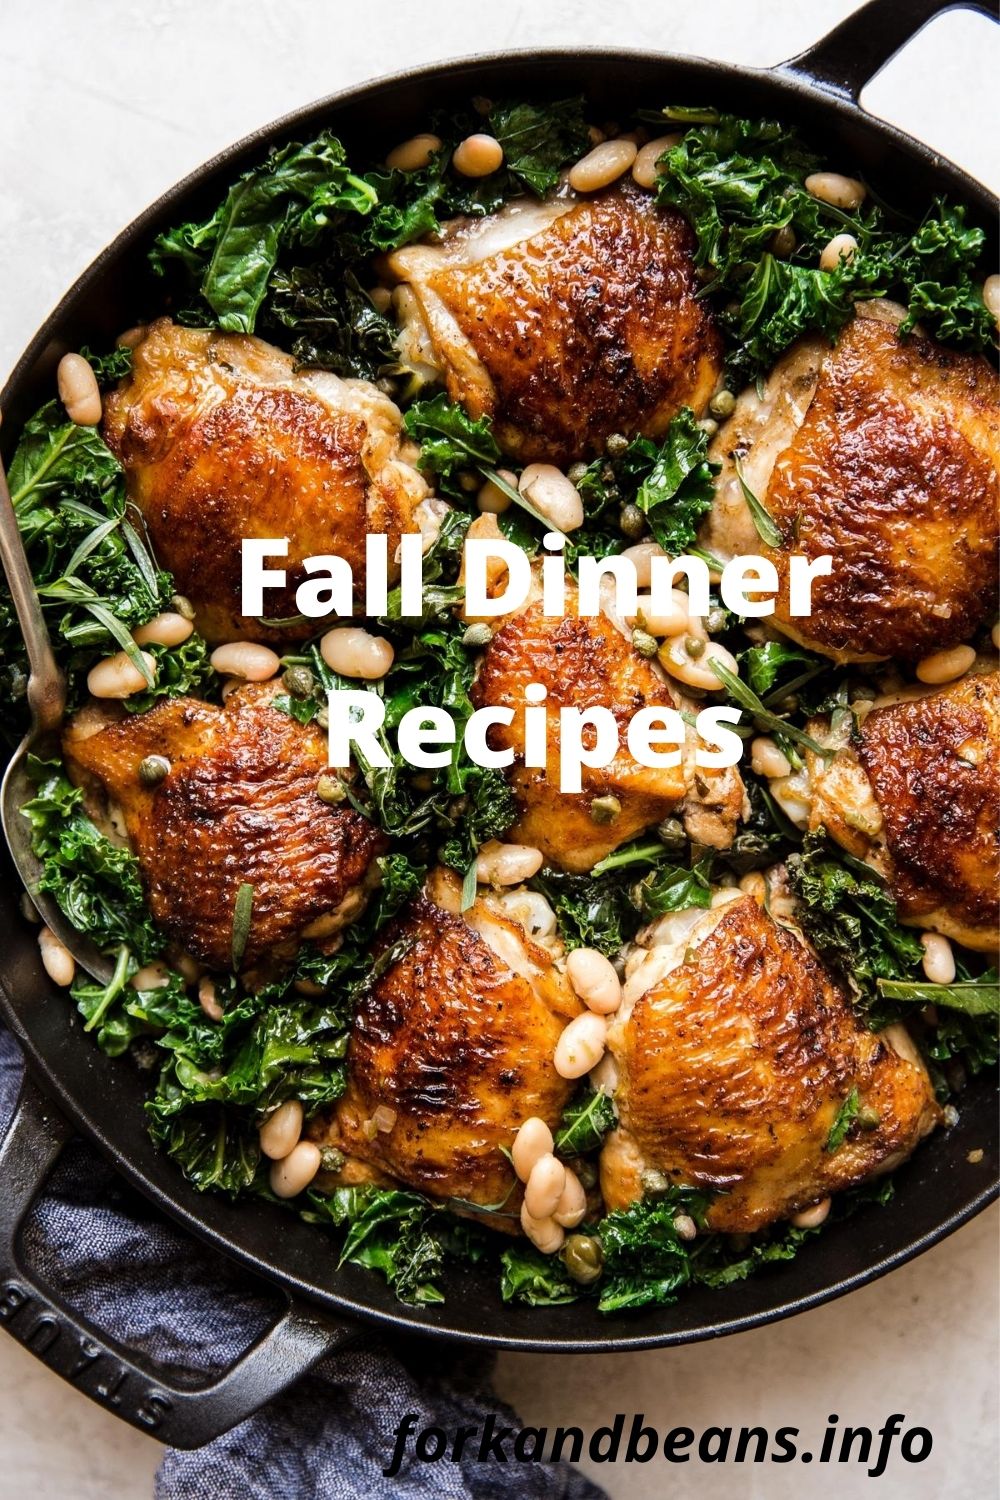 One-Pot Braised Chicken with Kale and White Beans